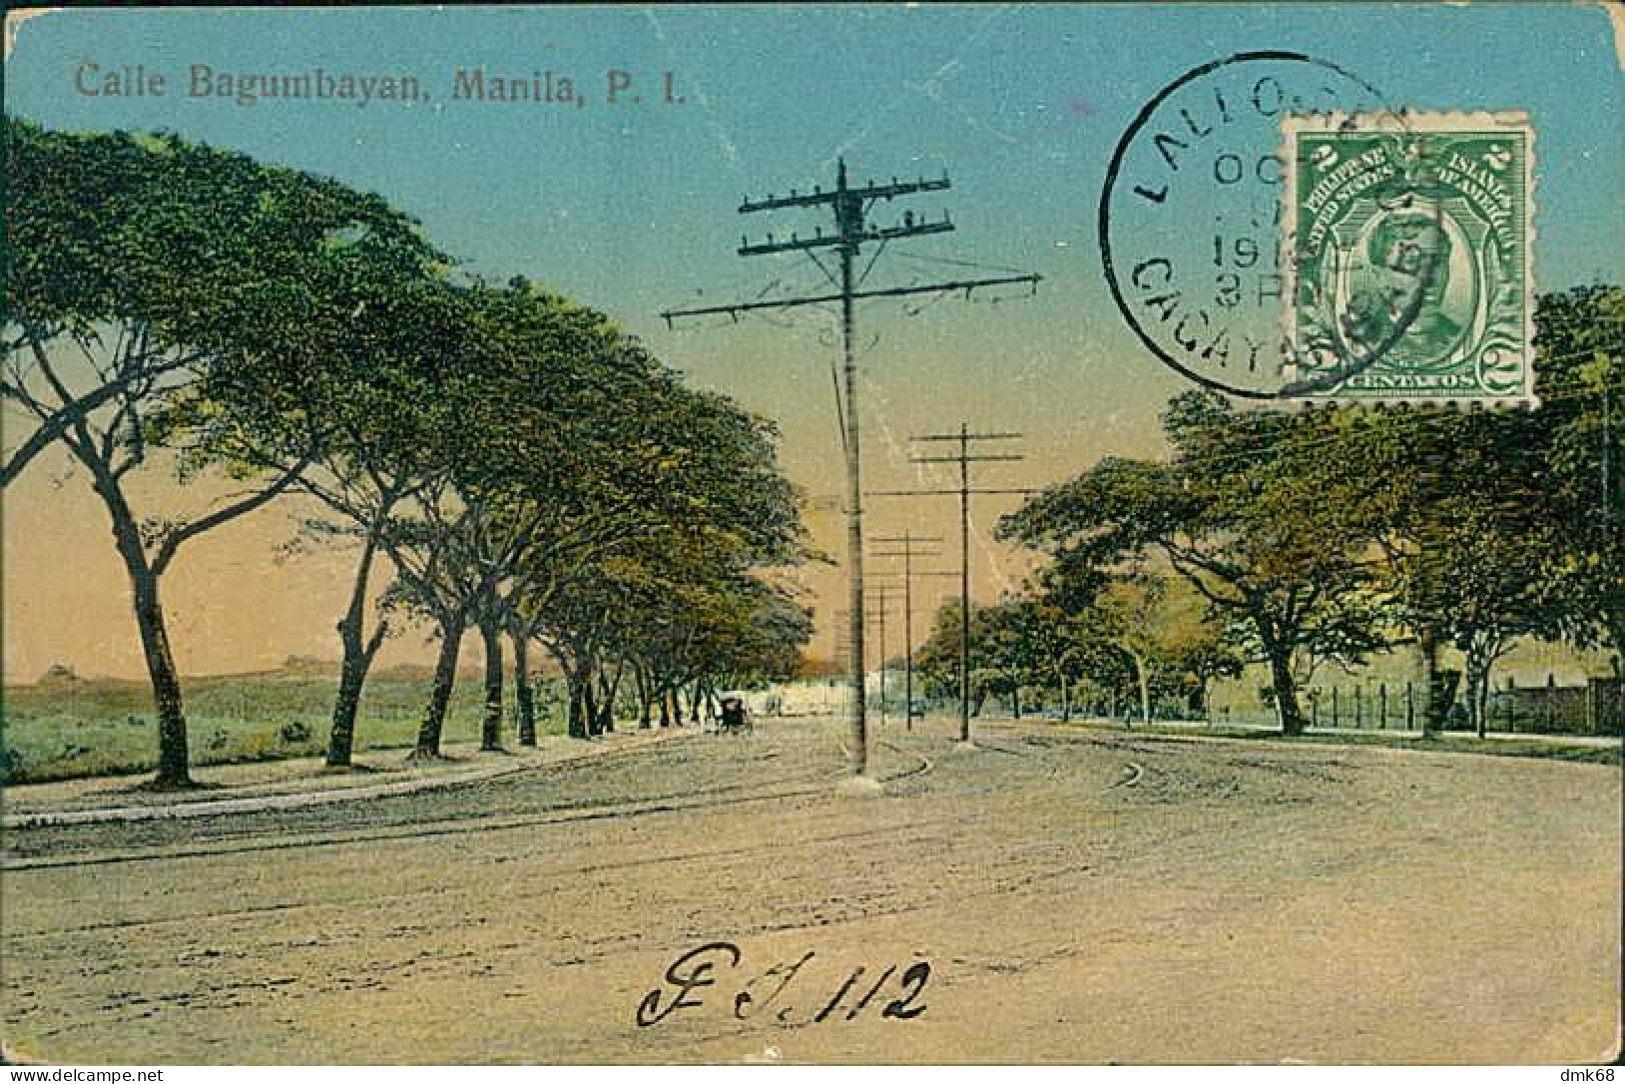 PHILIPPINES - MANILA - CALLE BAGUMBAYAN - PUB. BY CAMERA SUPPLY COMPANY - MAILED 1918 / STAMP (18345) - Philippines